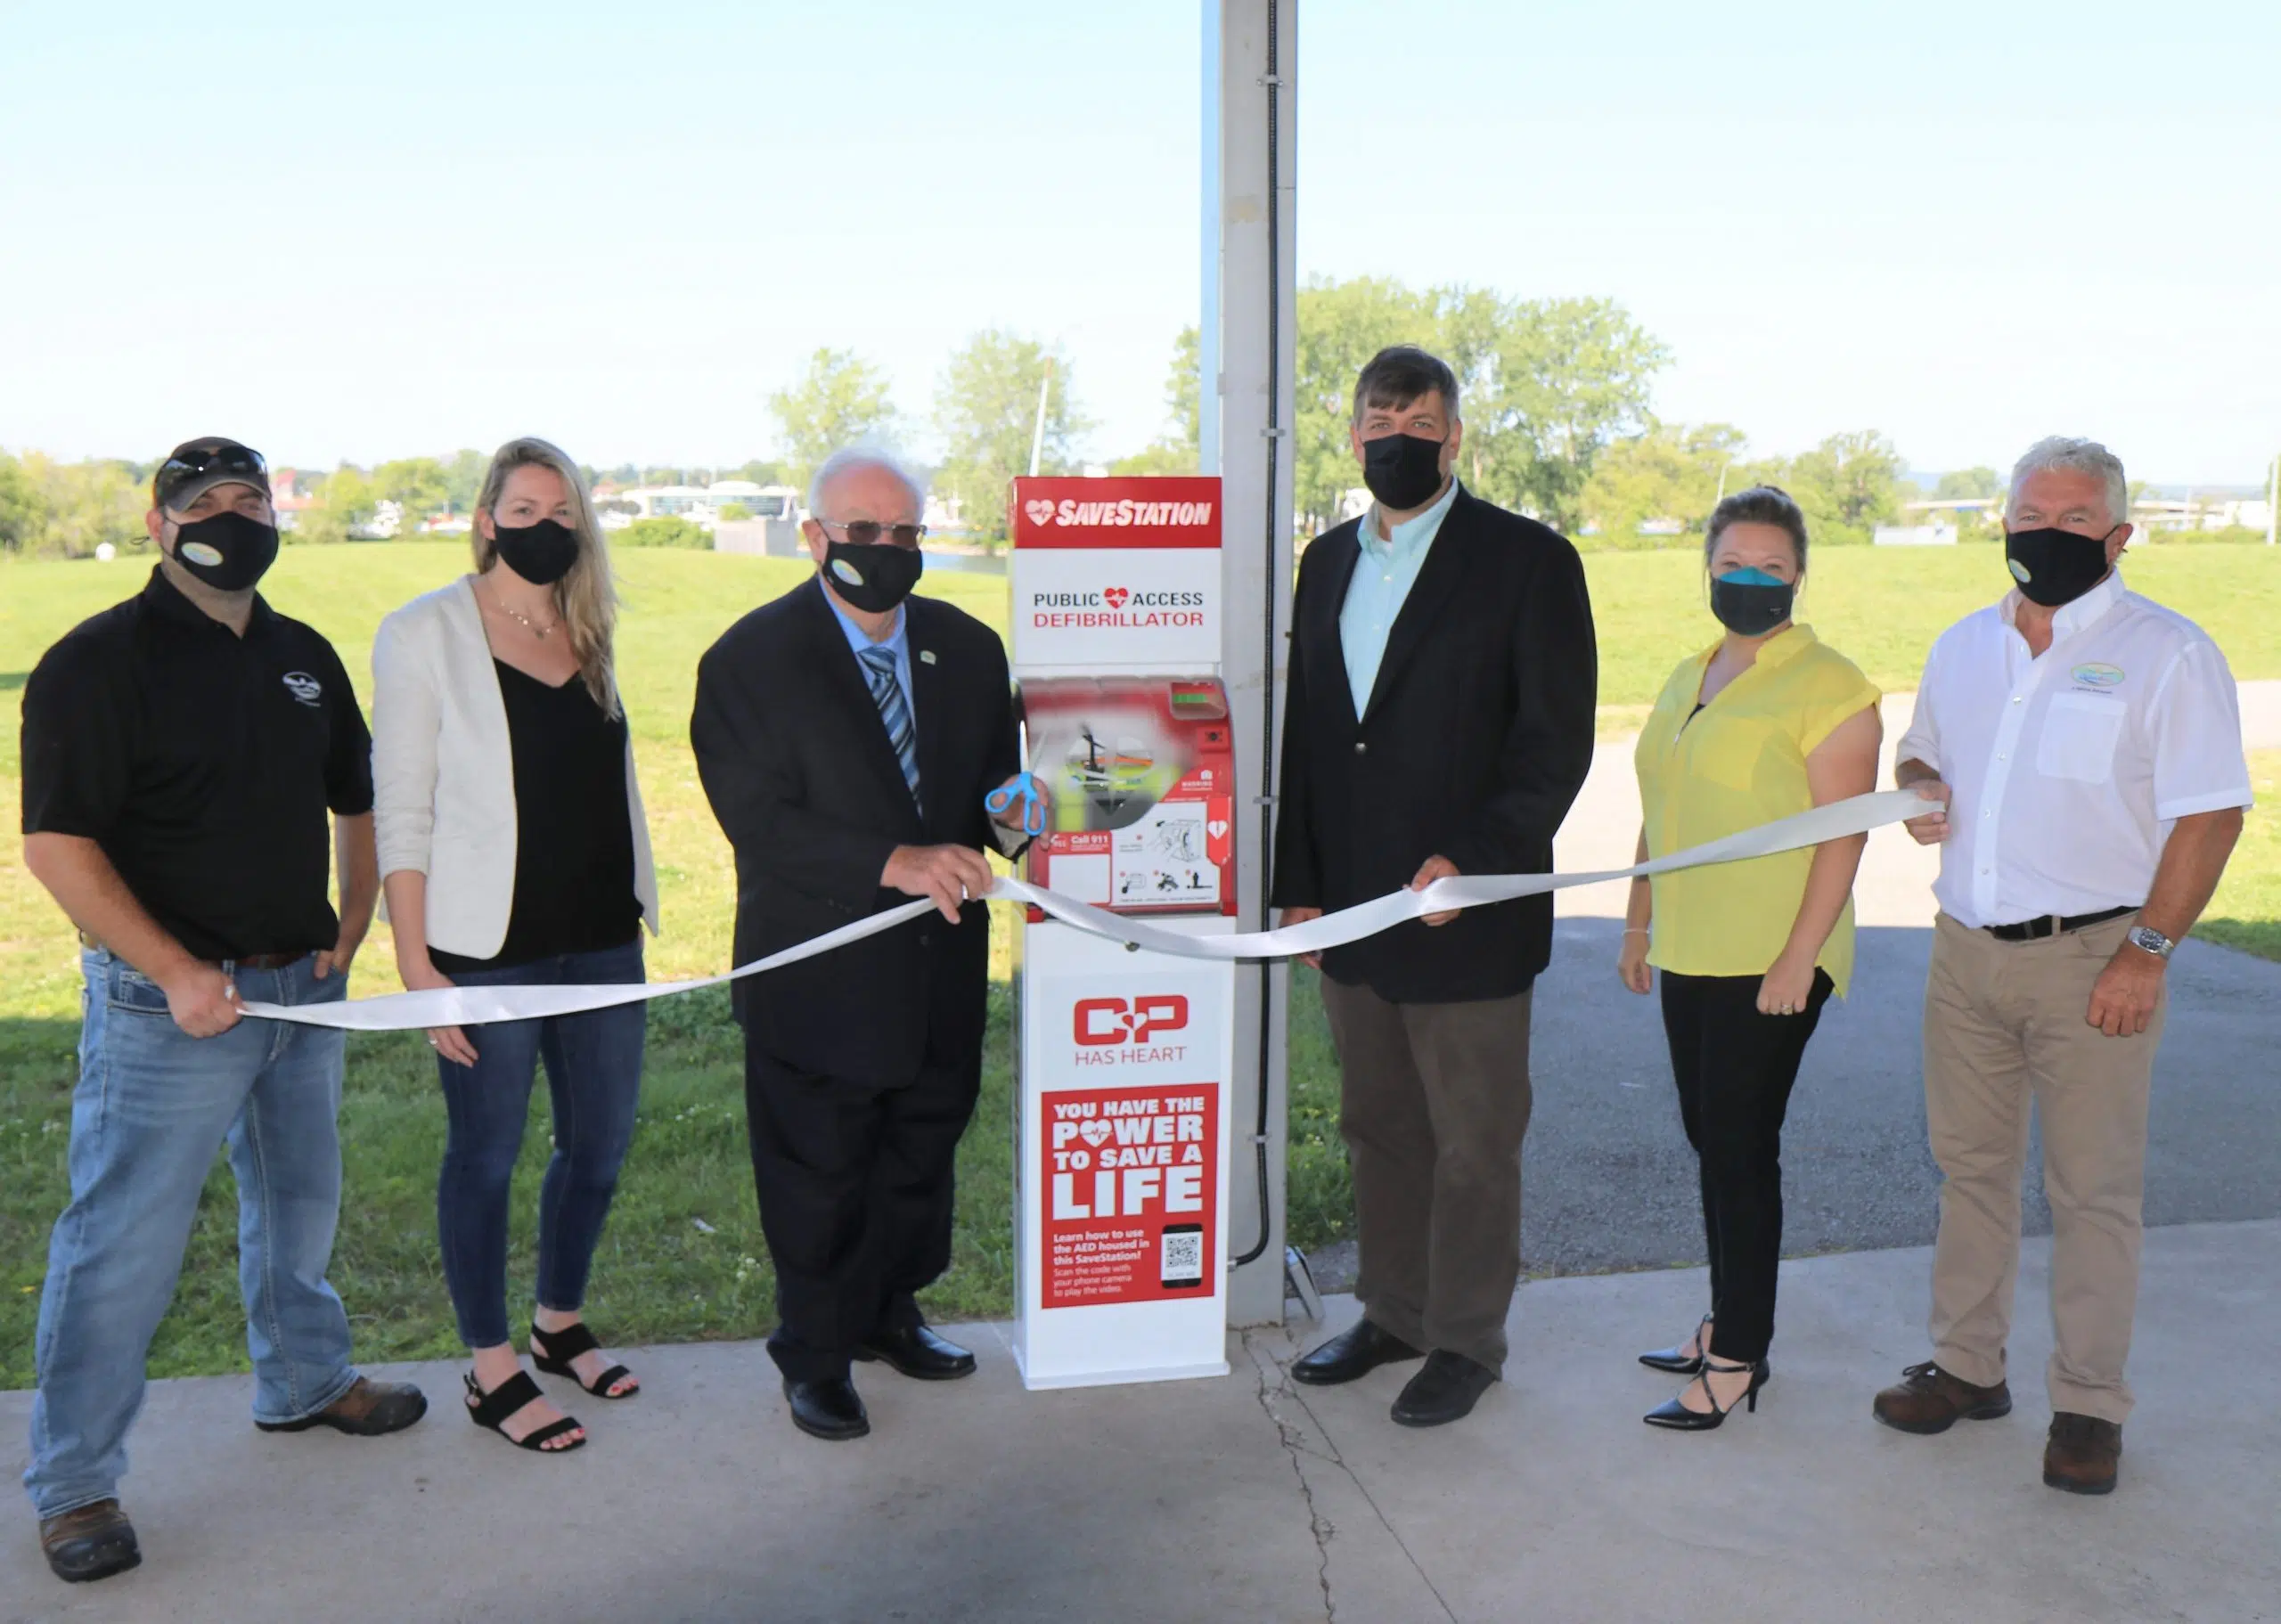 New SaveStation unveiled in Quinte West